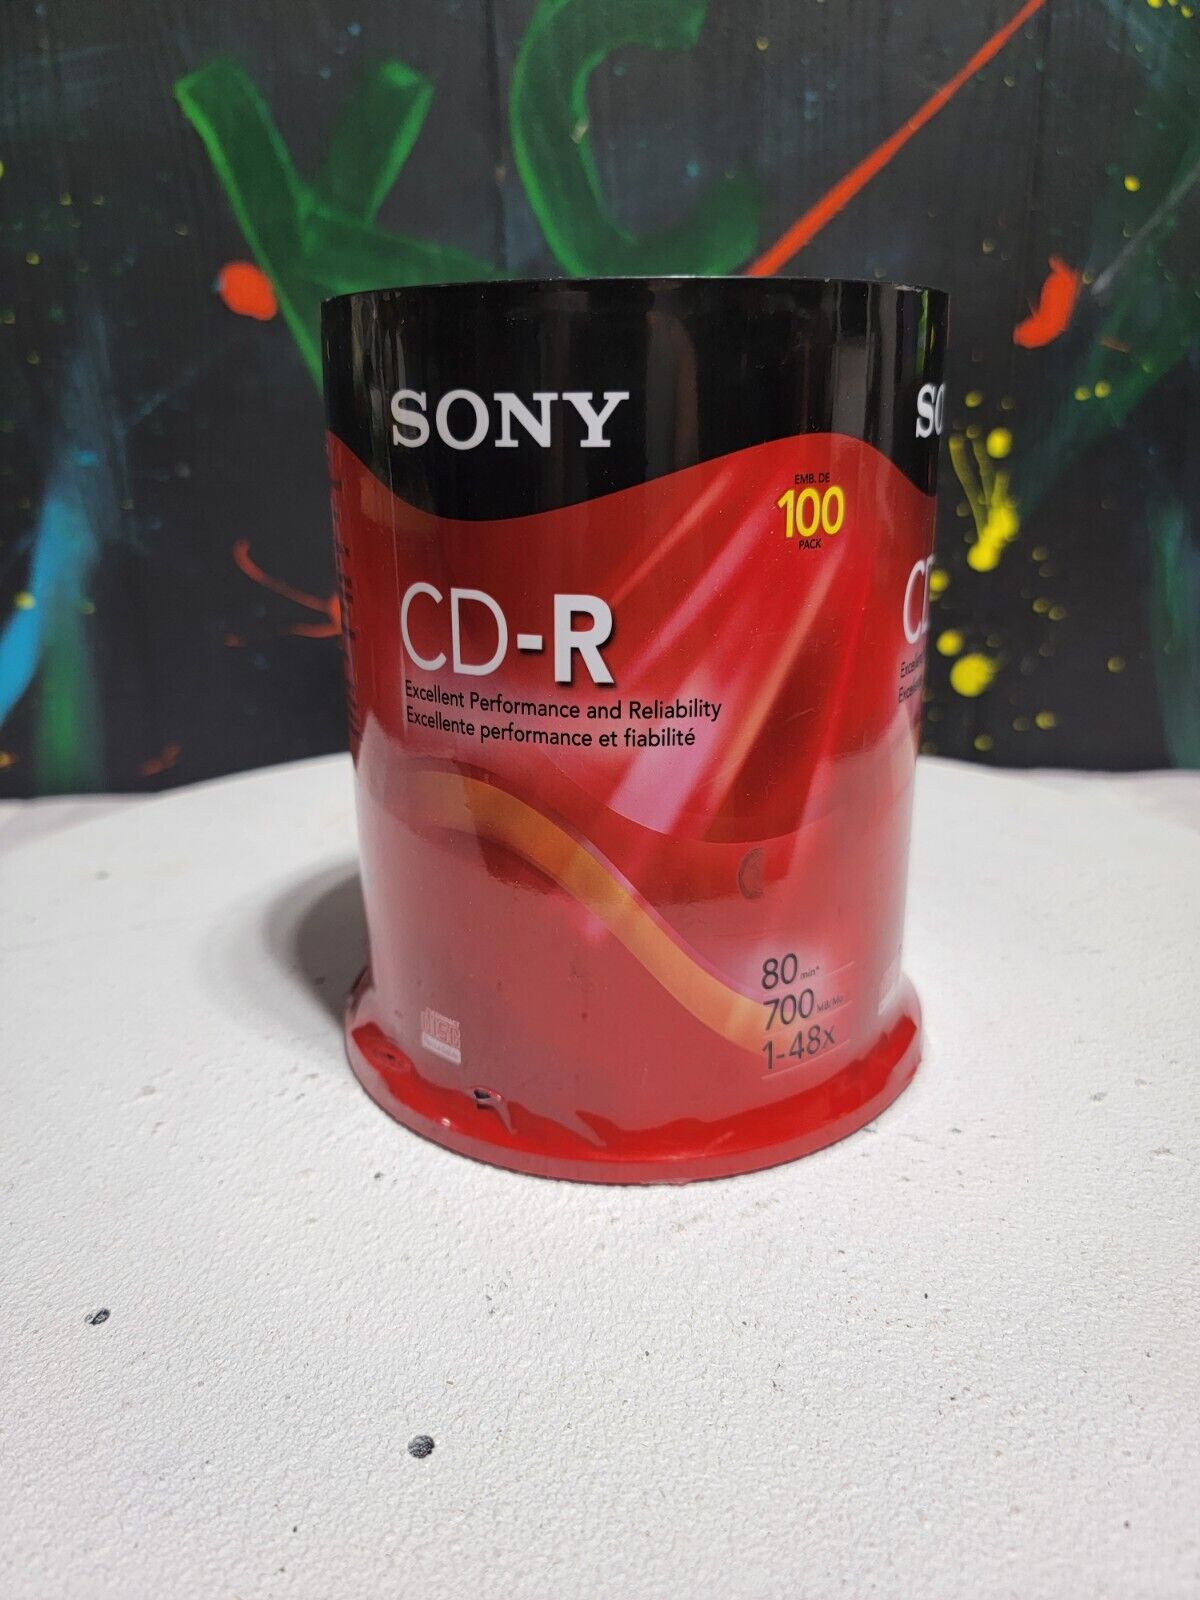 Sony CD-R 700MB Storage Media Discs 80 min Pack of 100 Blank CDs Factory Sealed